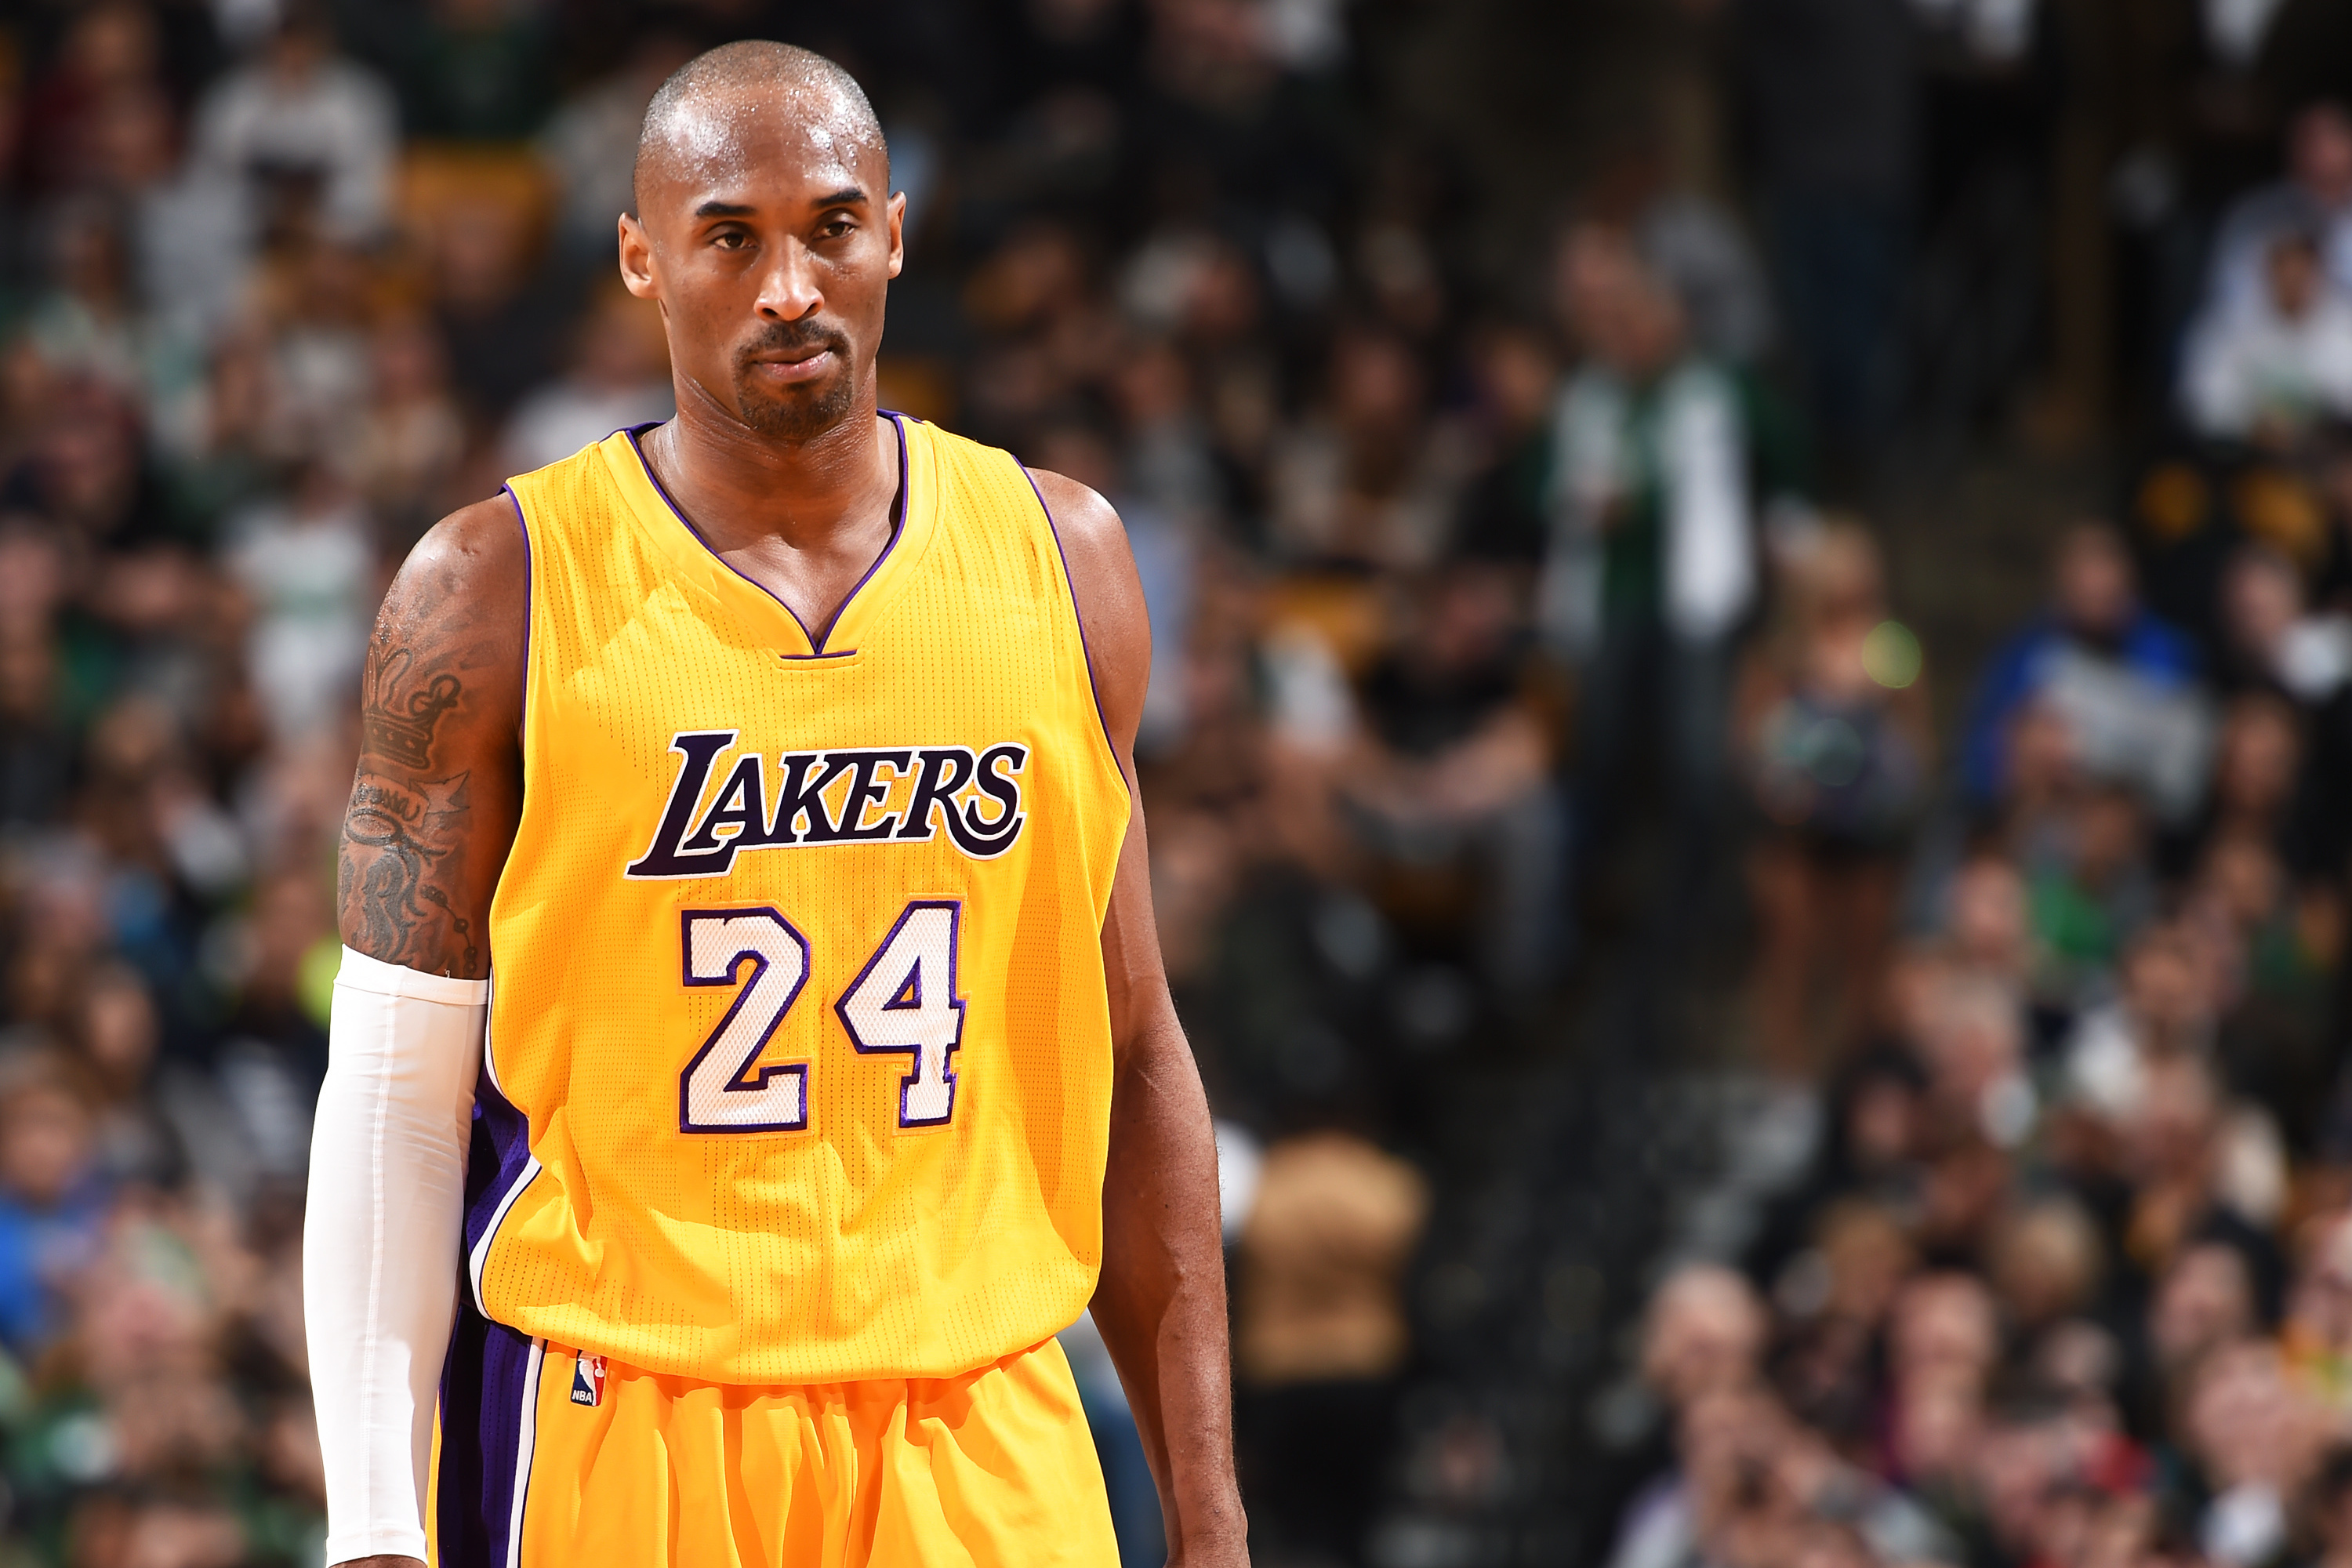 Los Angeles' guard Kobe Bryant returns to the floor after a time